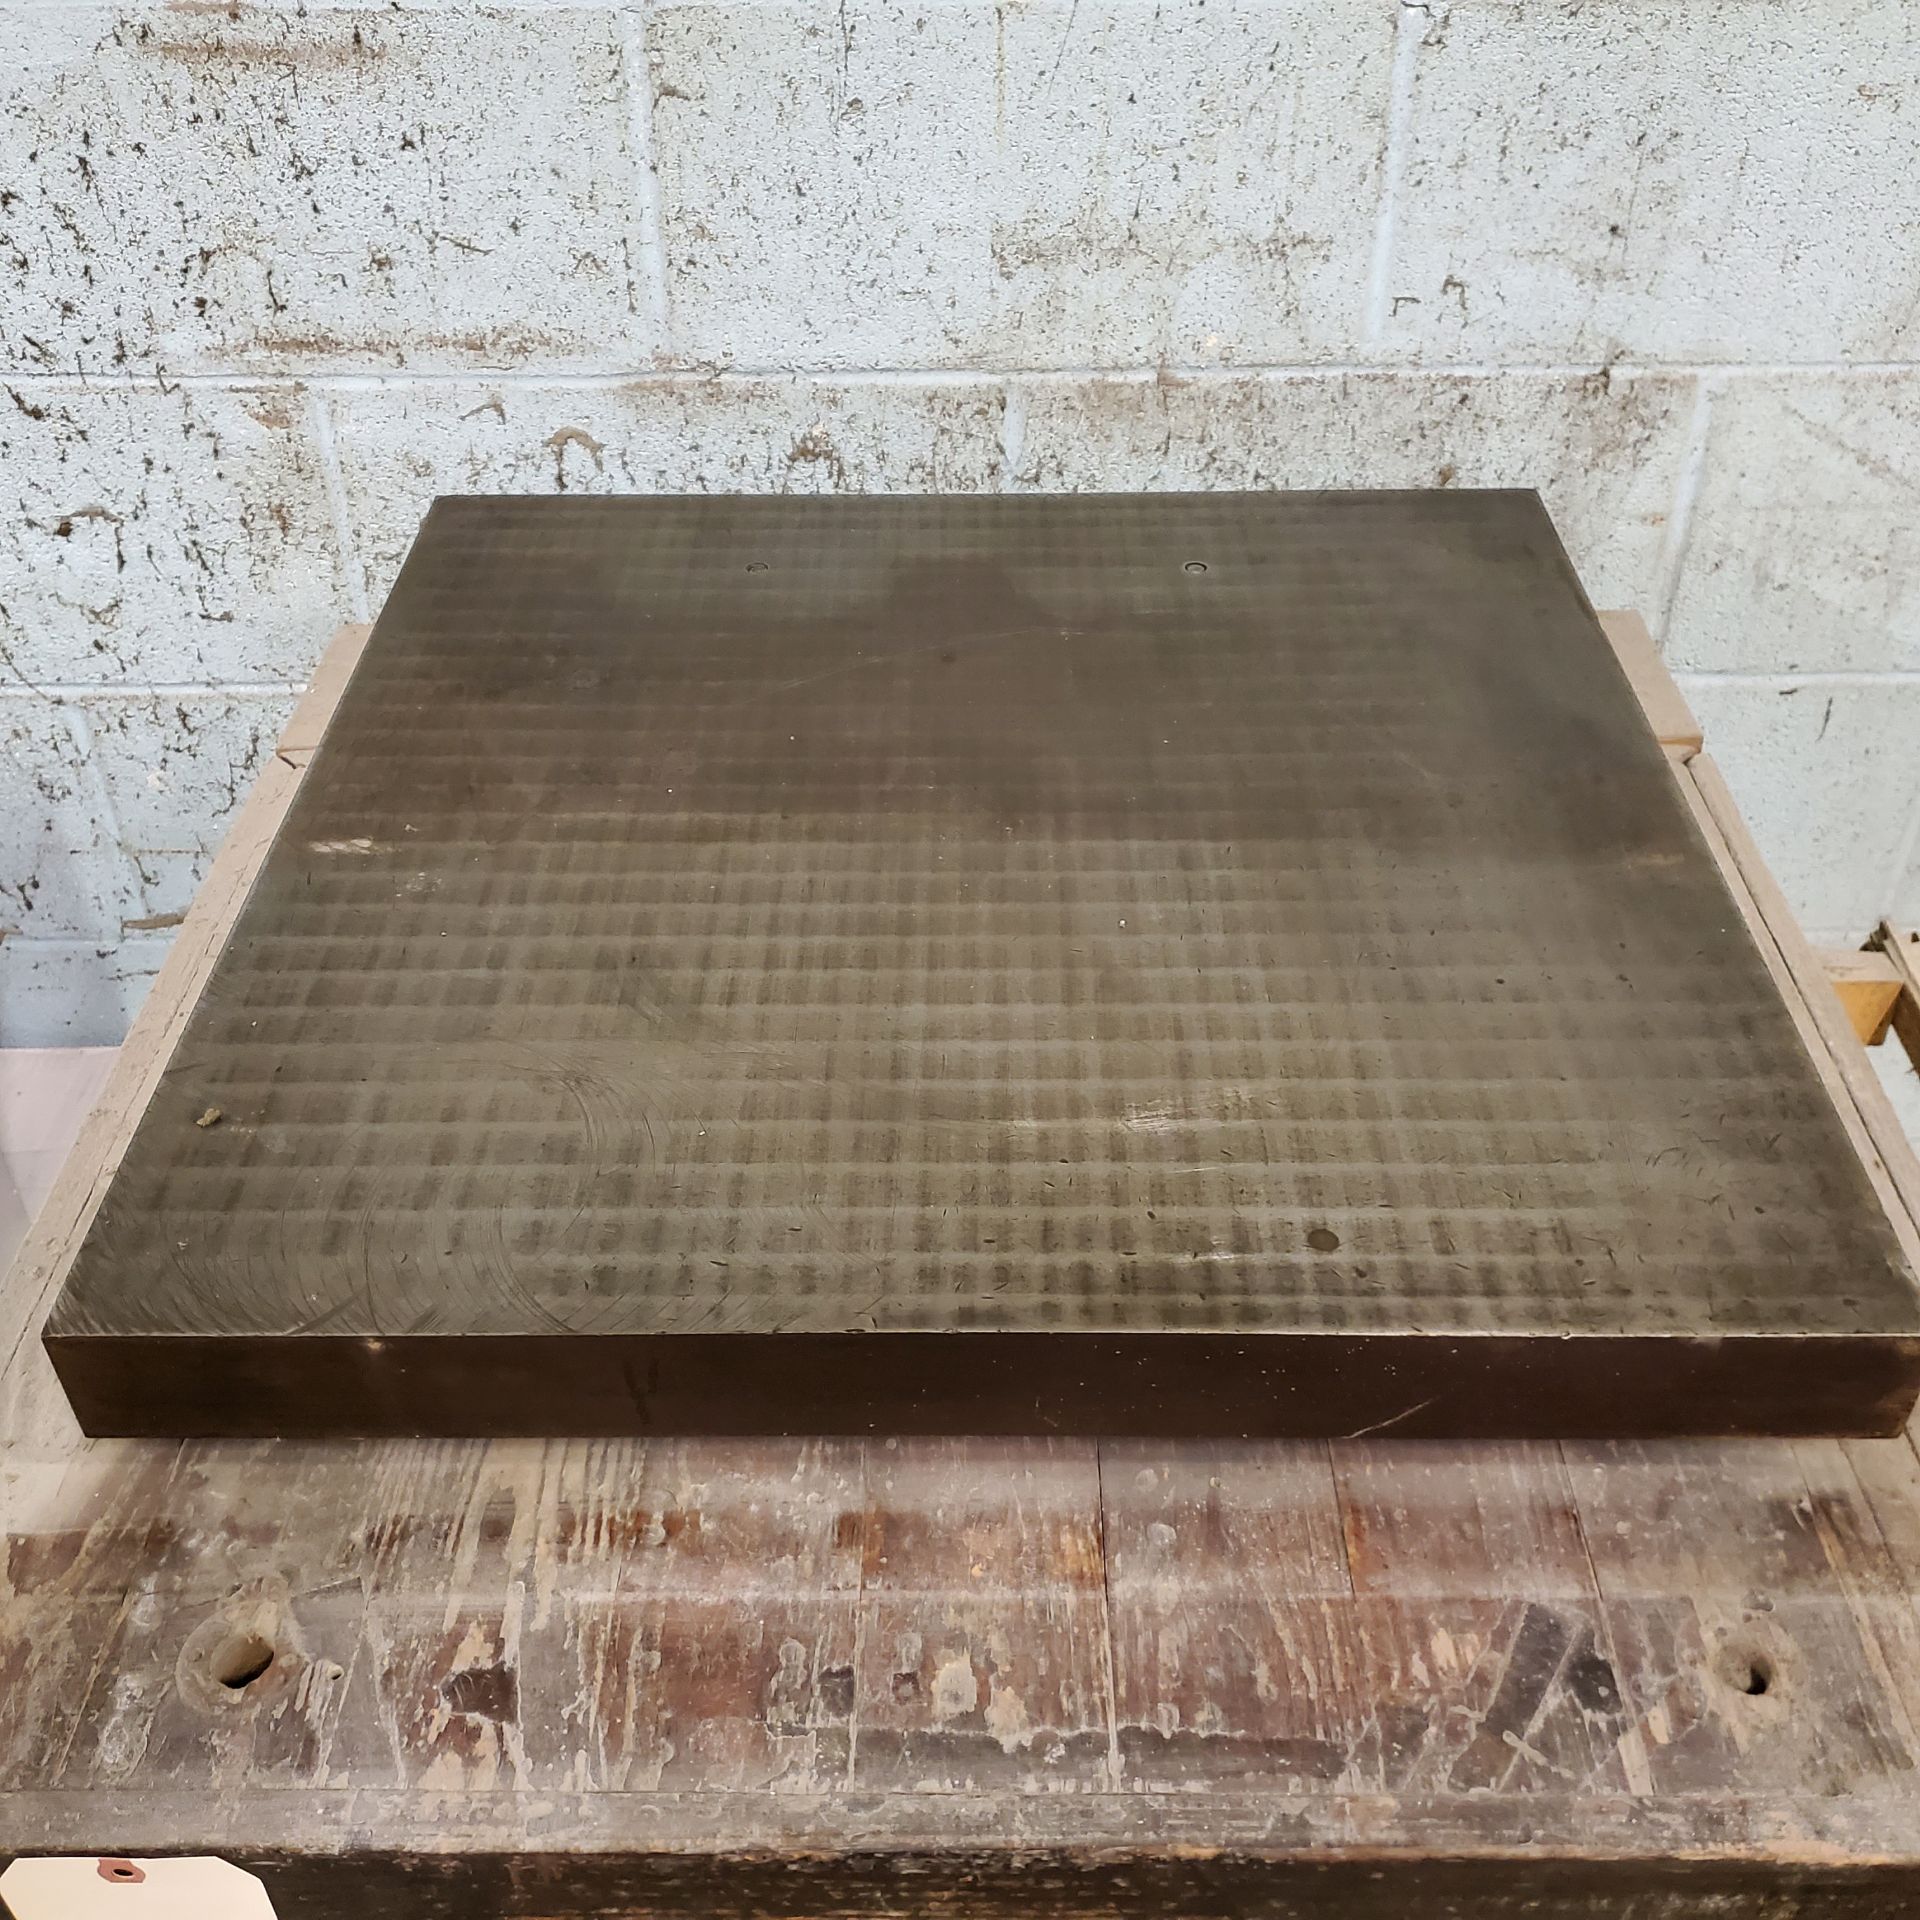 24" x 24" Cast Iron Surface Plate - Image 2 of 2